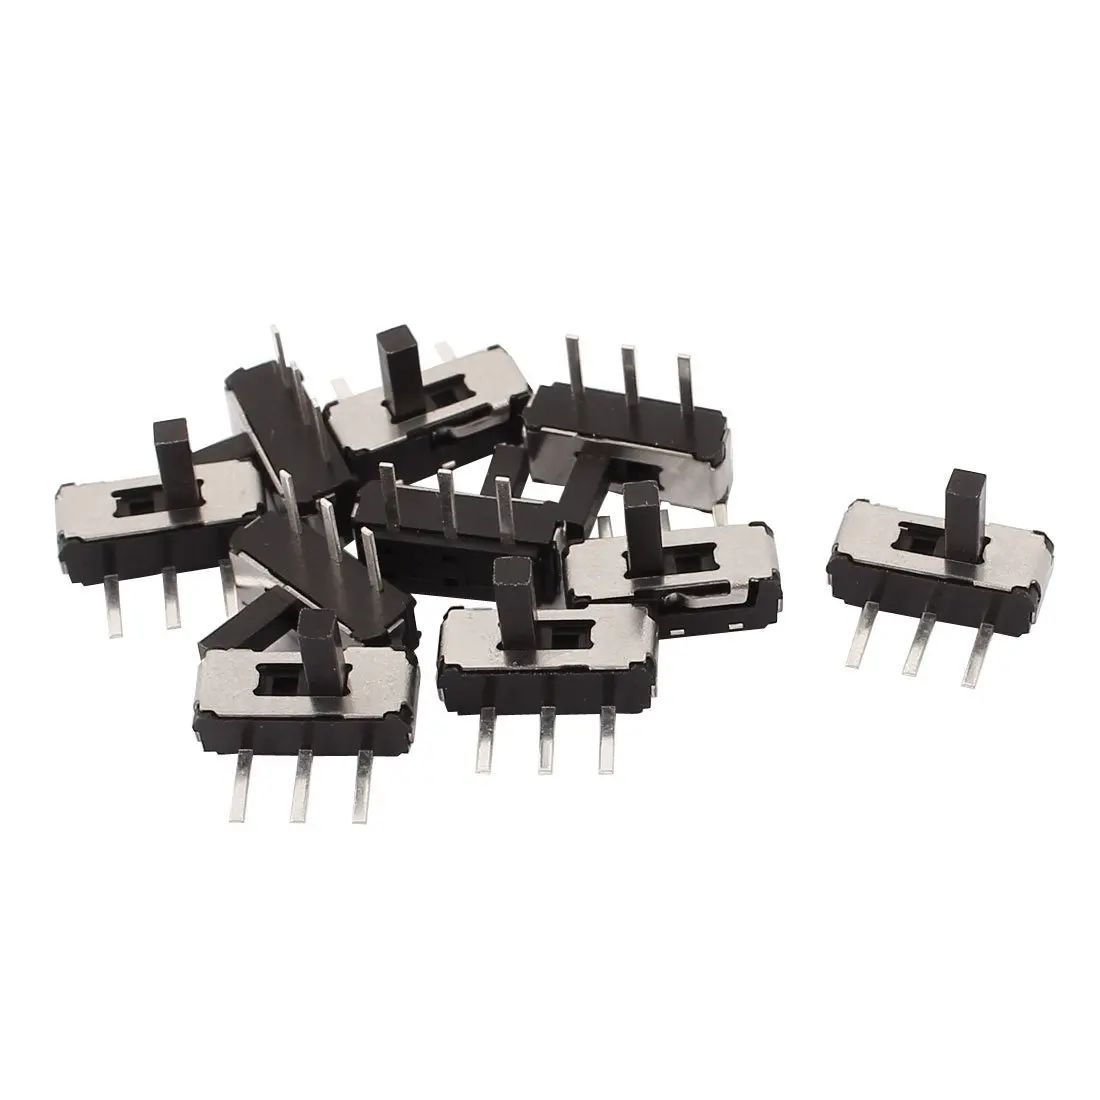 Pack 10Pcs 12mm Vertical Slide Switch SPDT 1P2T With 3 Pins PCB Panel Arduino